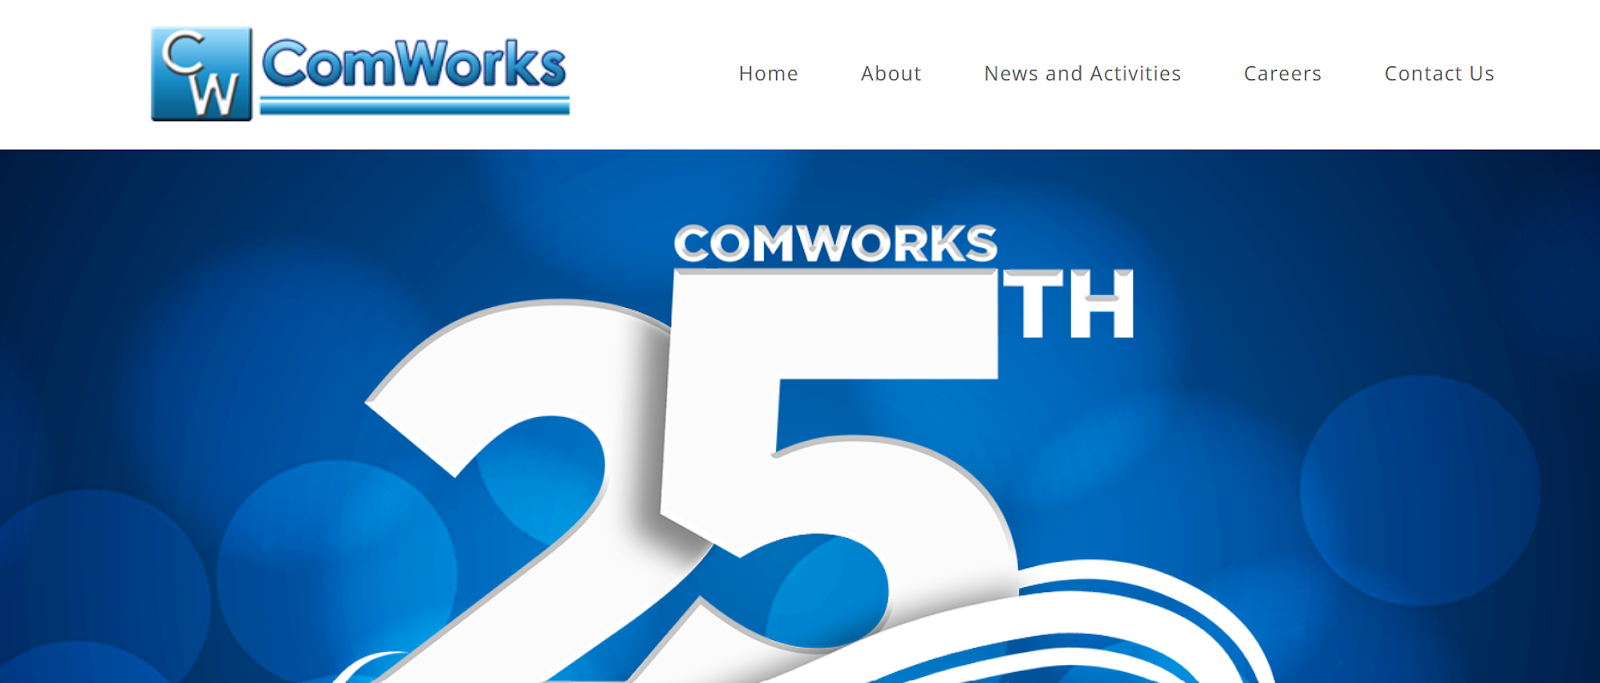 ComWorks website snapshot highlighting the services it offers.